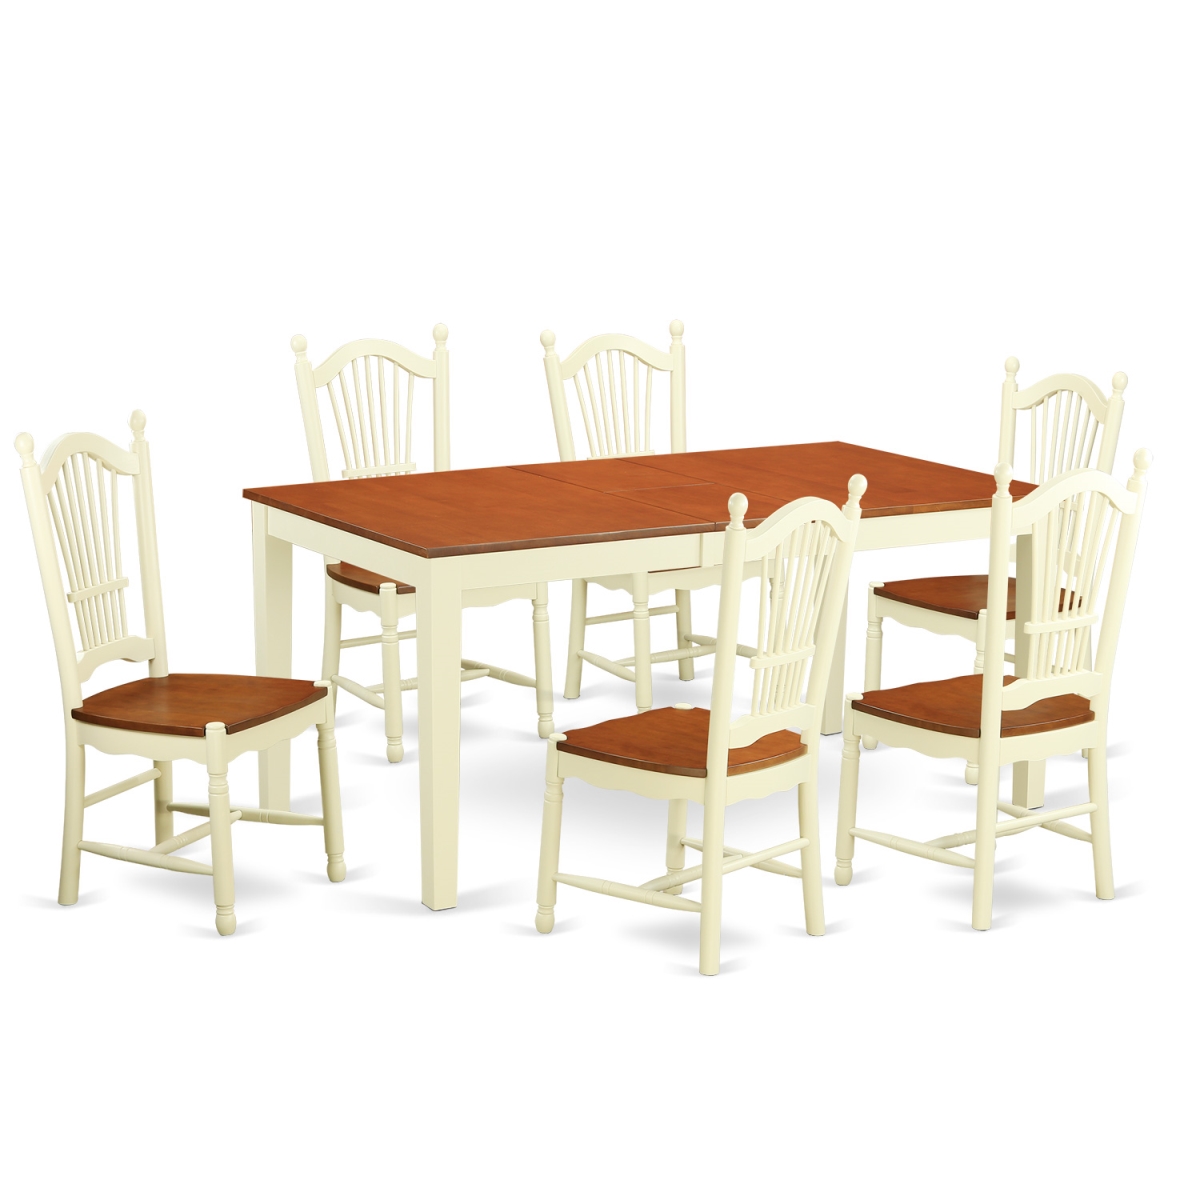 NIDO7-WHI-W Kitchen Nook Dining Set with 6 Kitchen Table & 6 Chairs, Buttermilk & Cherry - 7 Piece -  East West Furniture